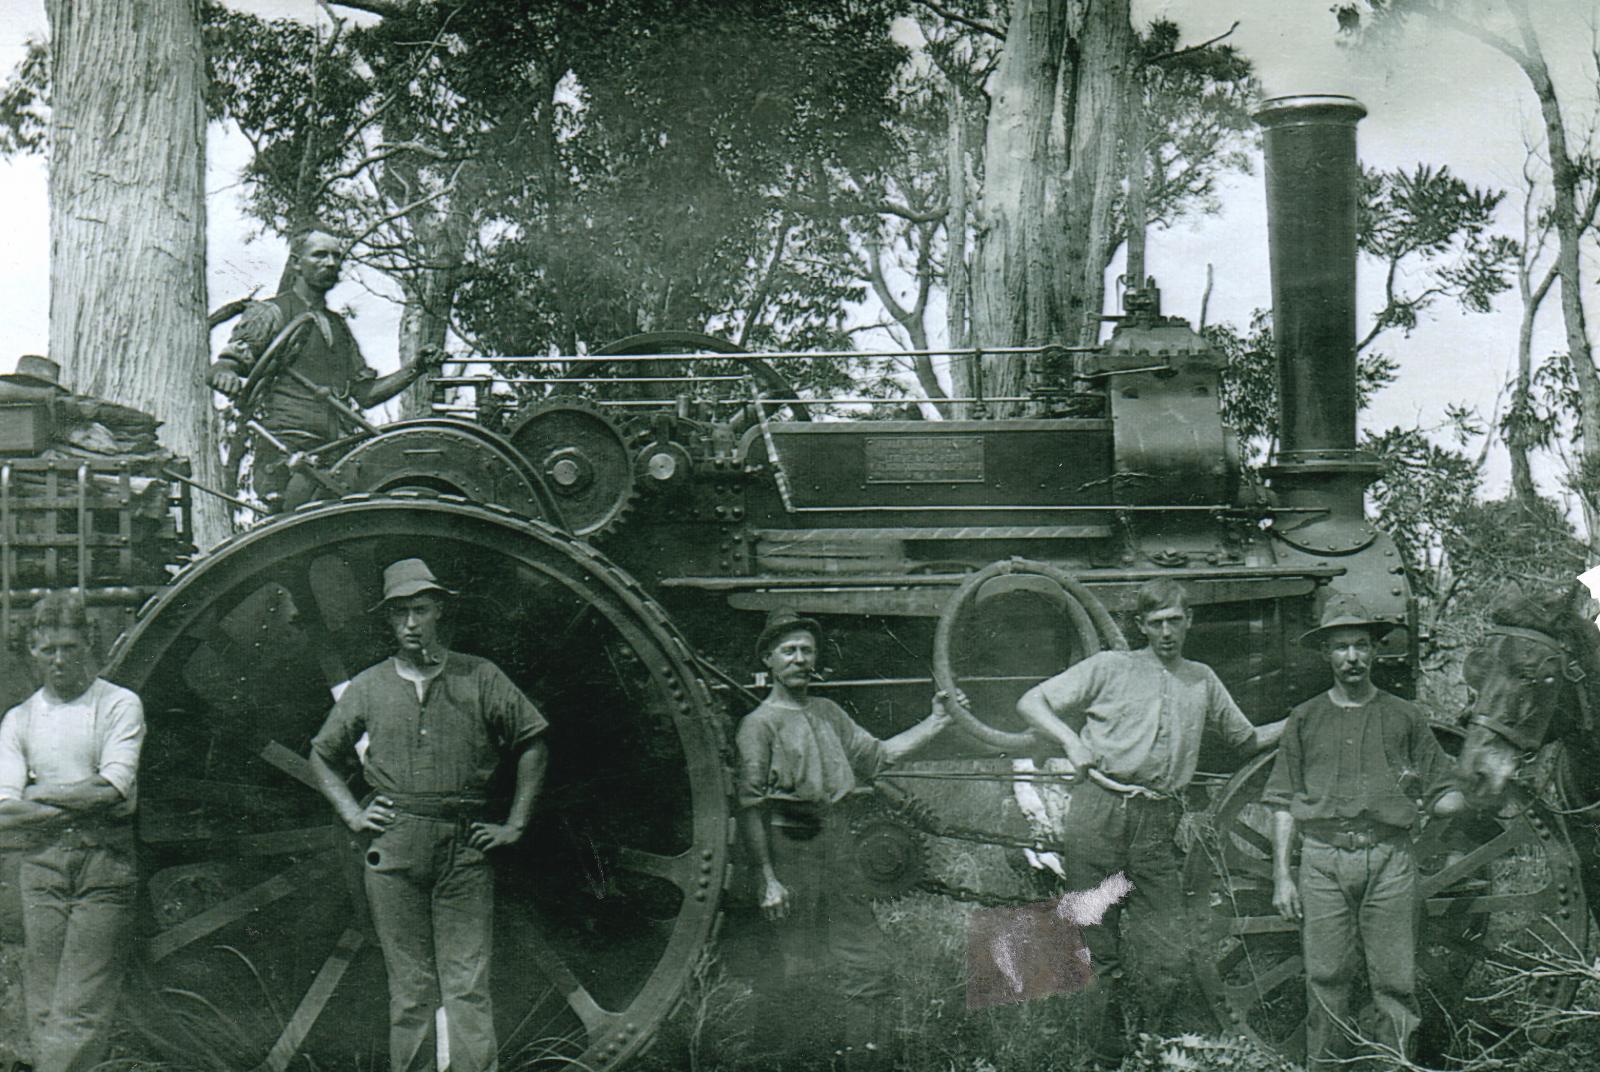 Mobile steam engine used for tree pulling at Ludlow 1912-1914 